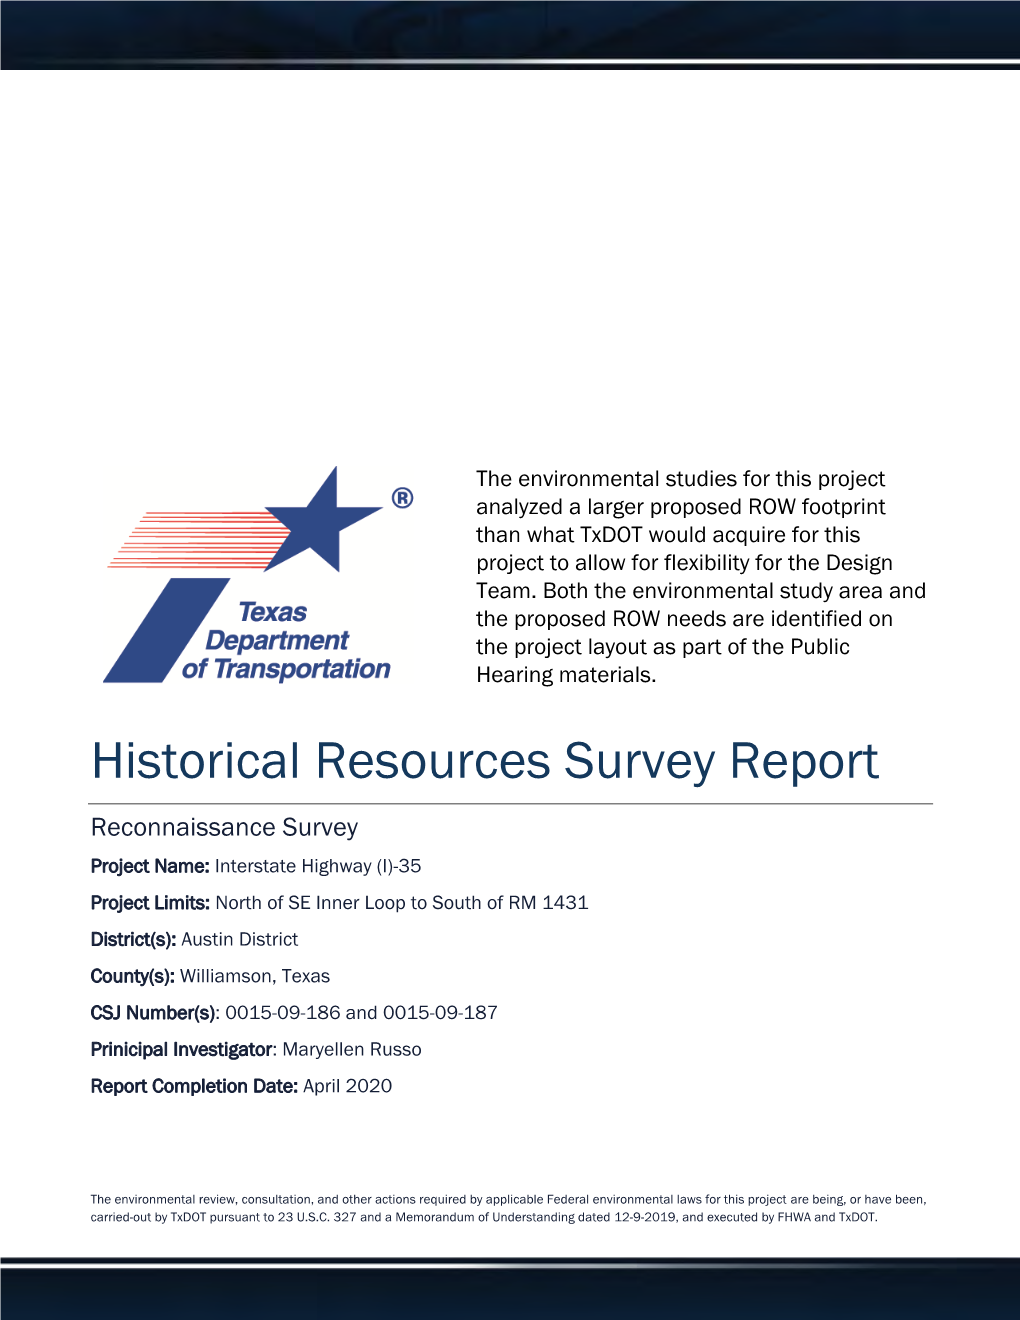 Historical Resources Survey Report with Note